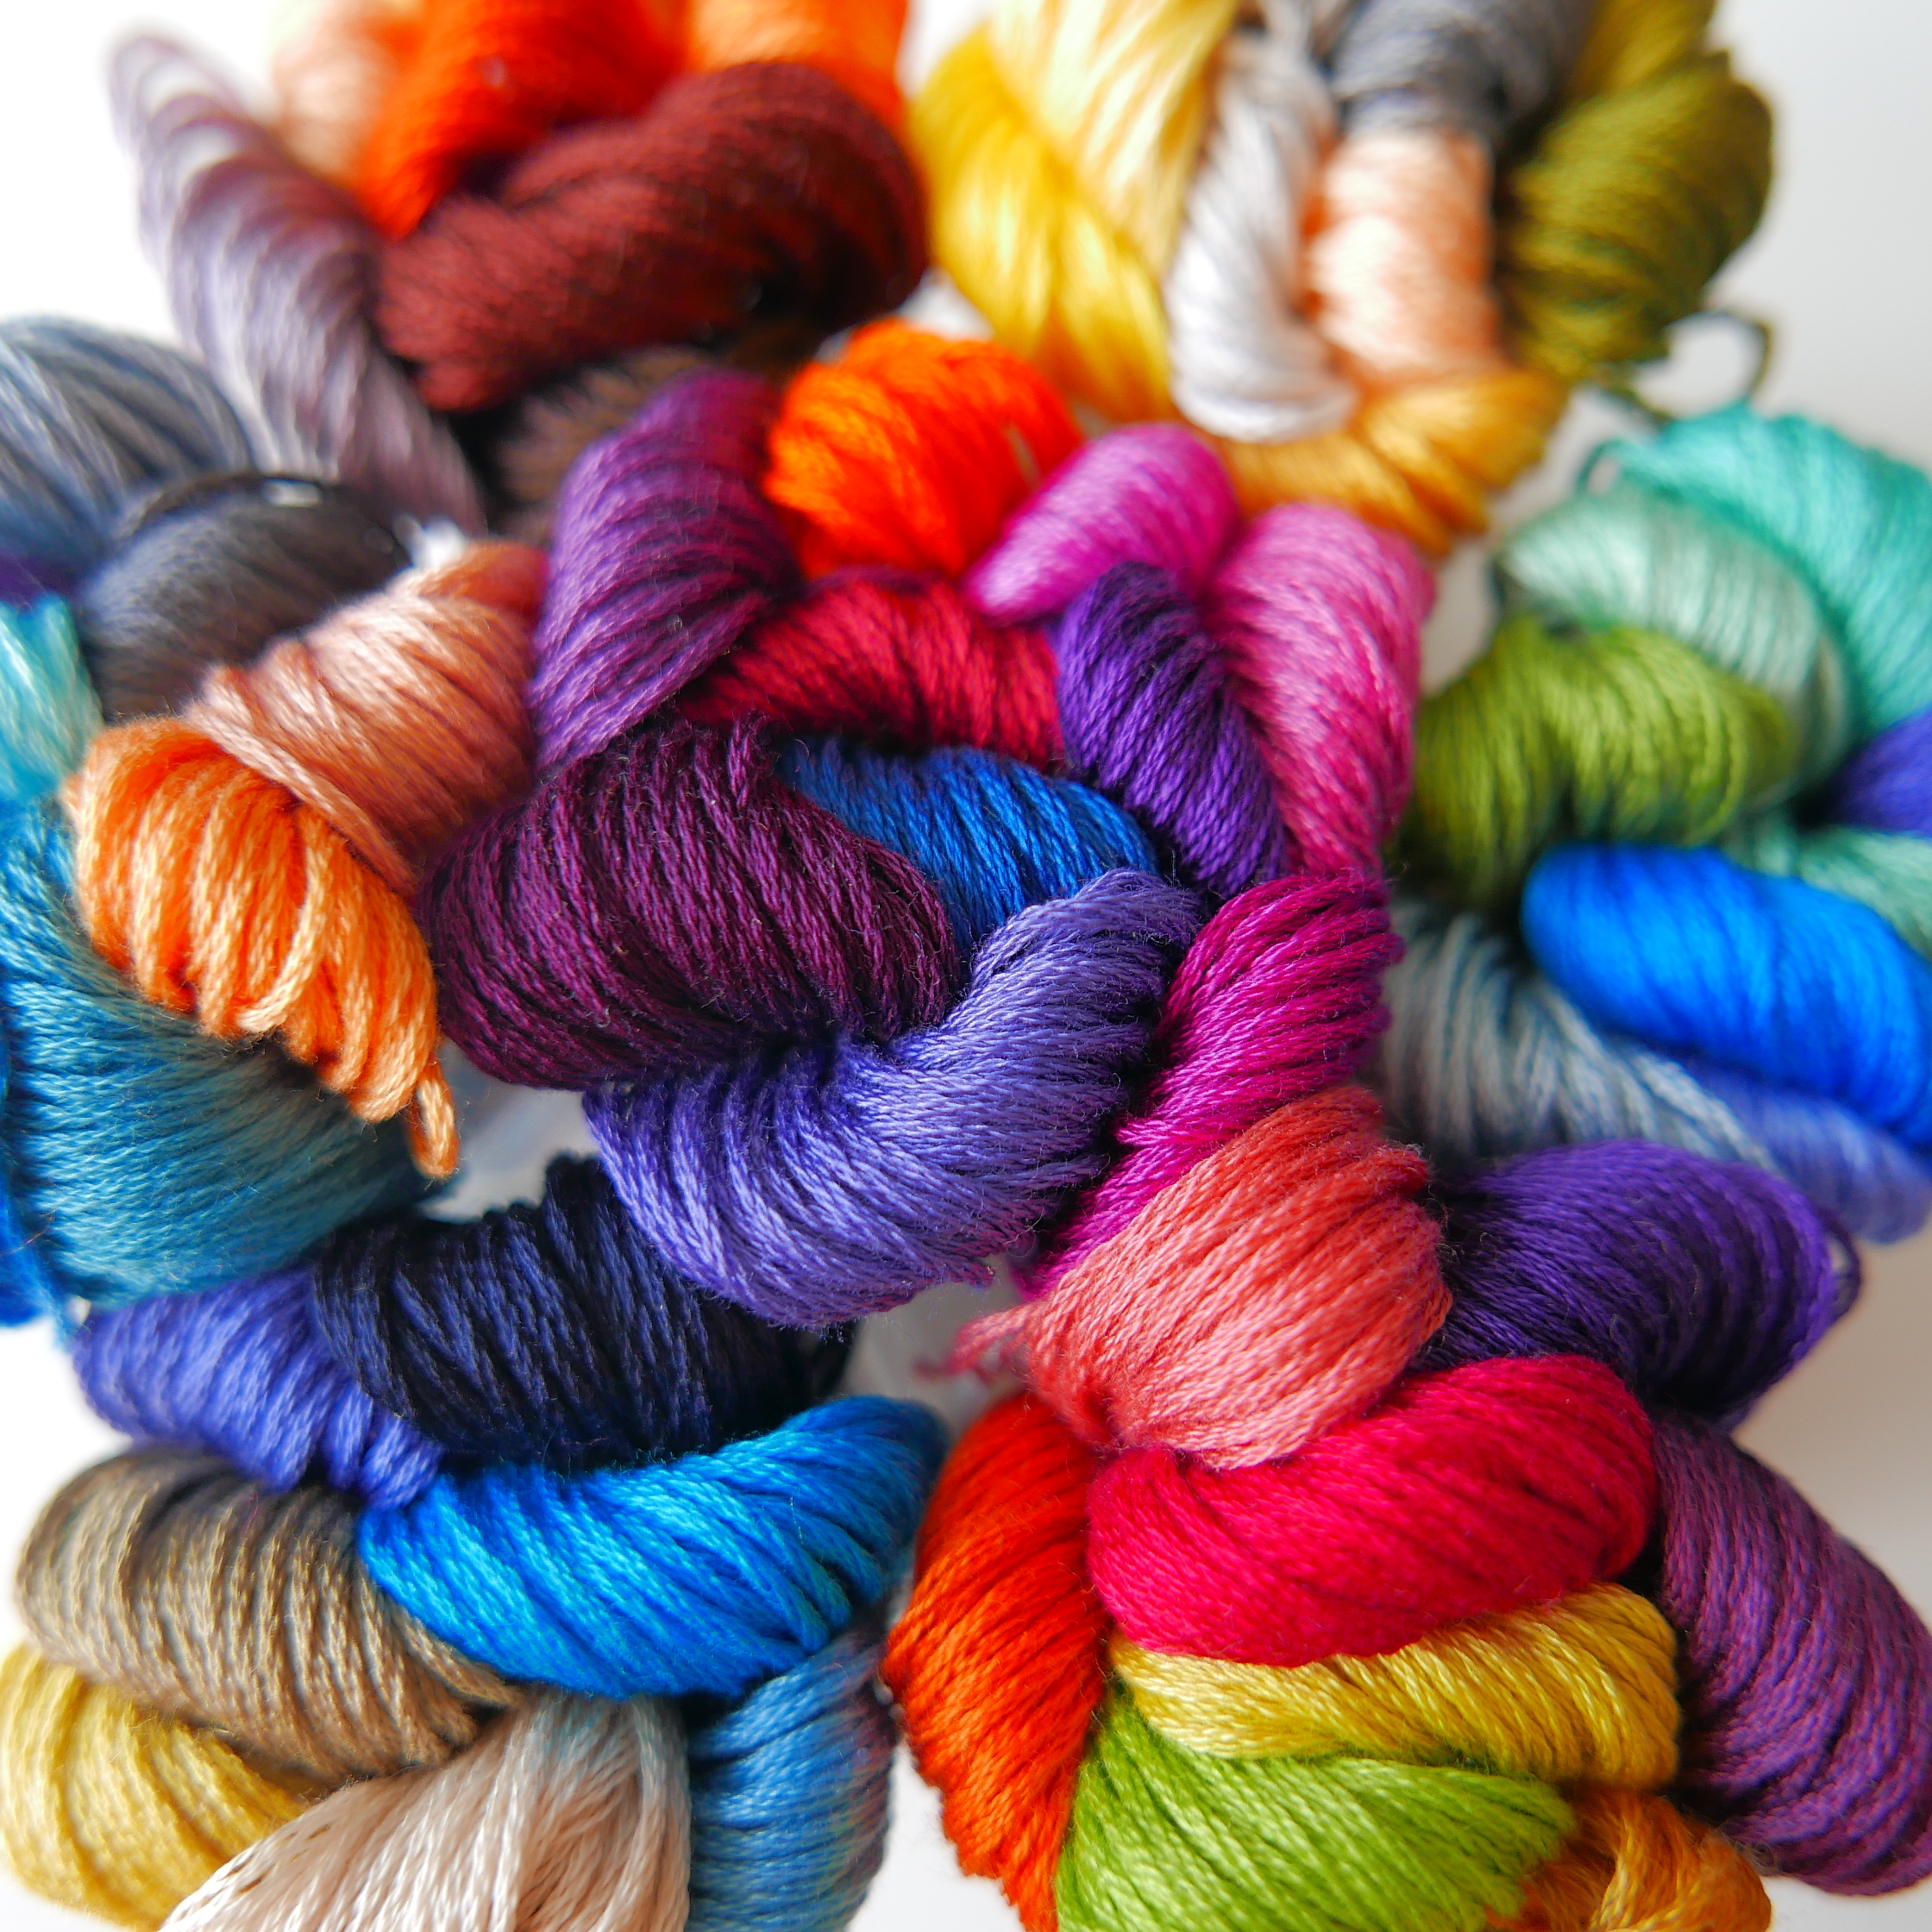 many colorful threads